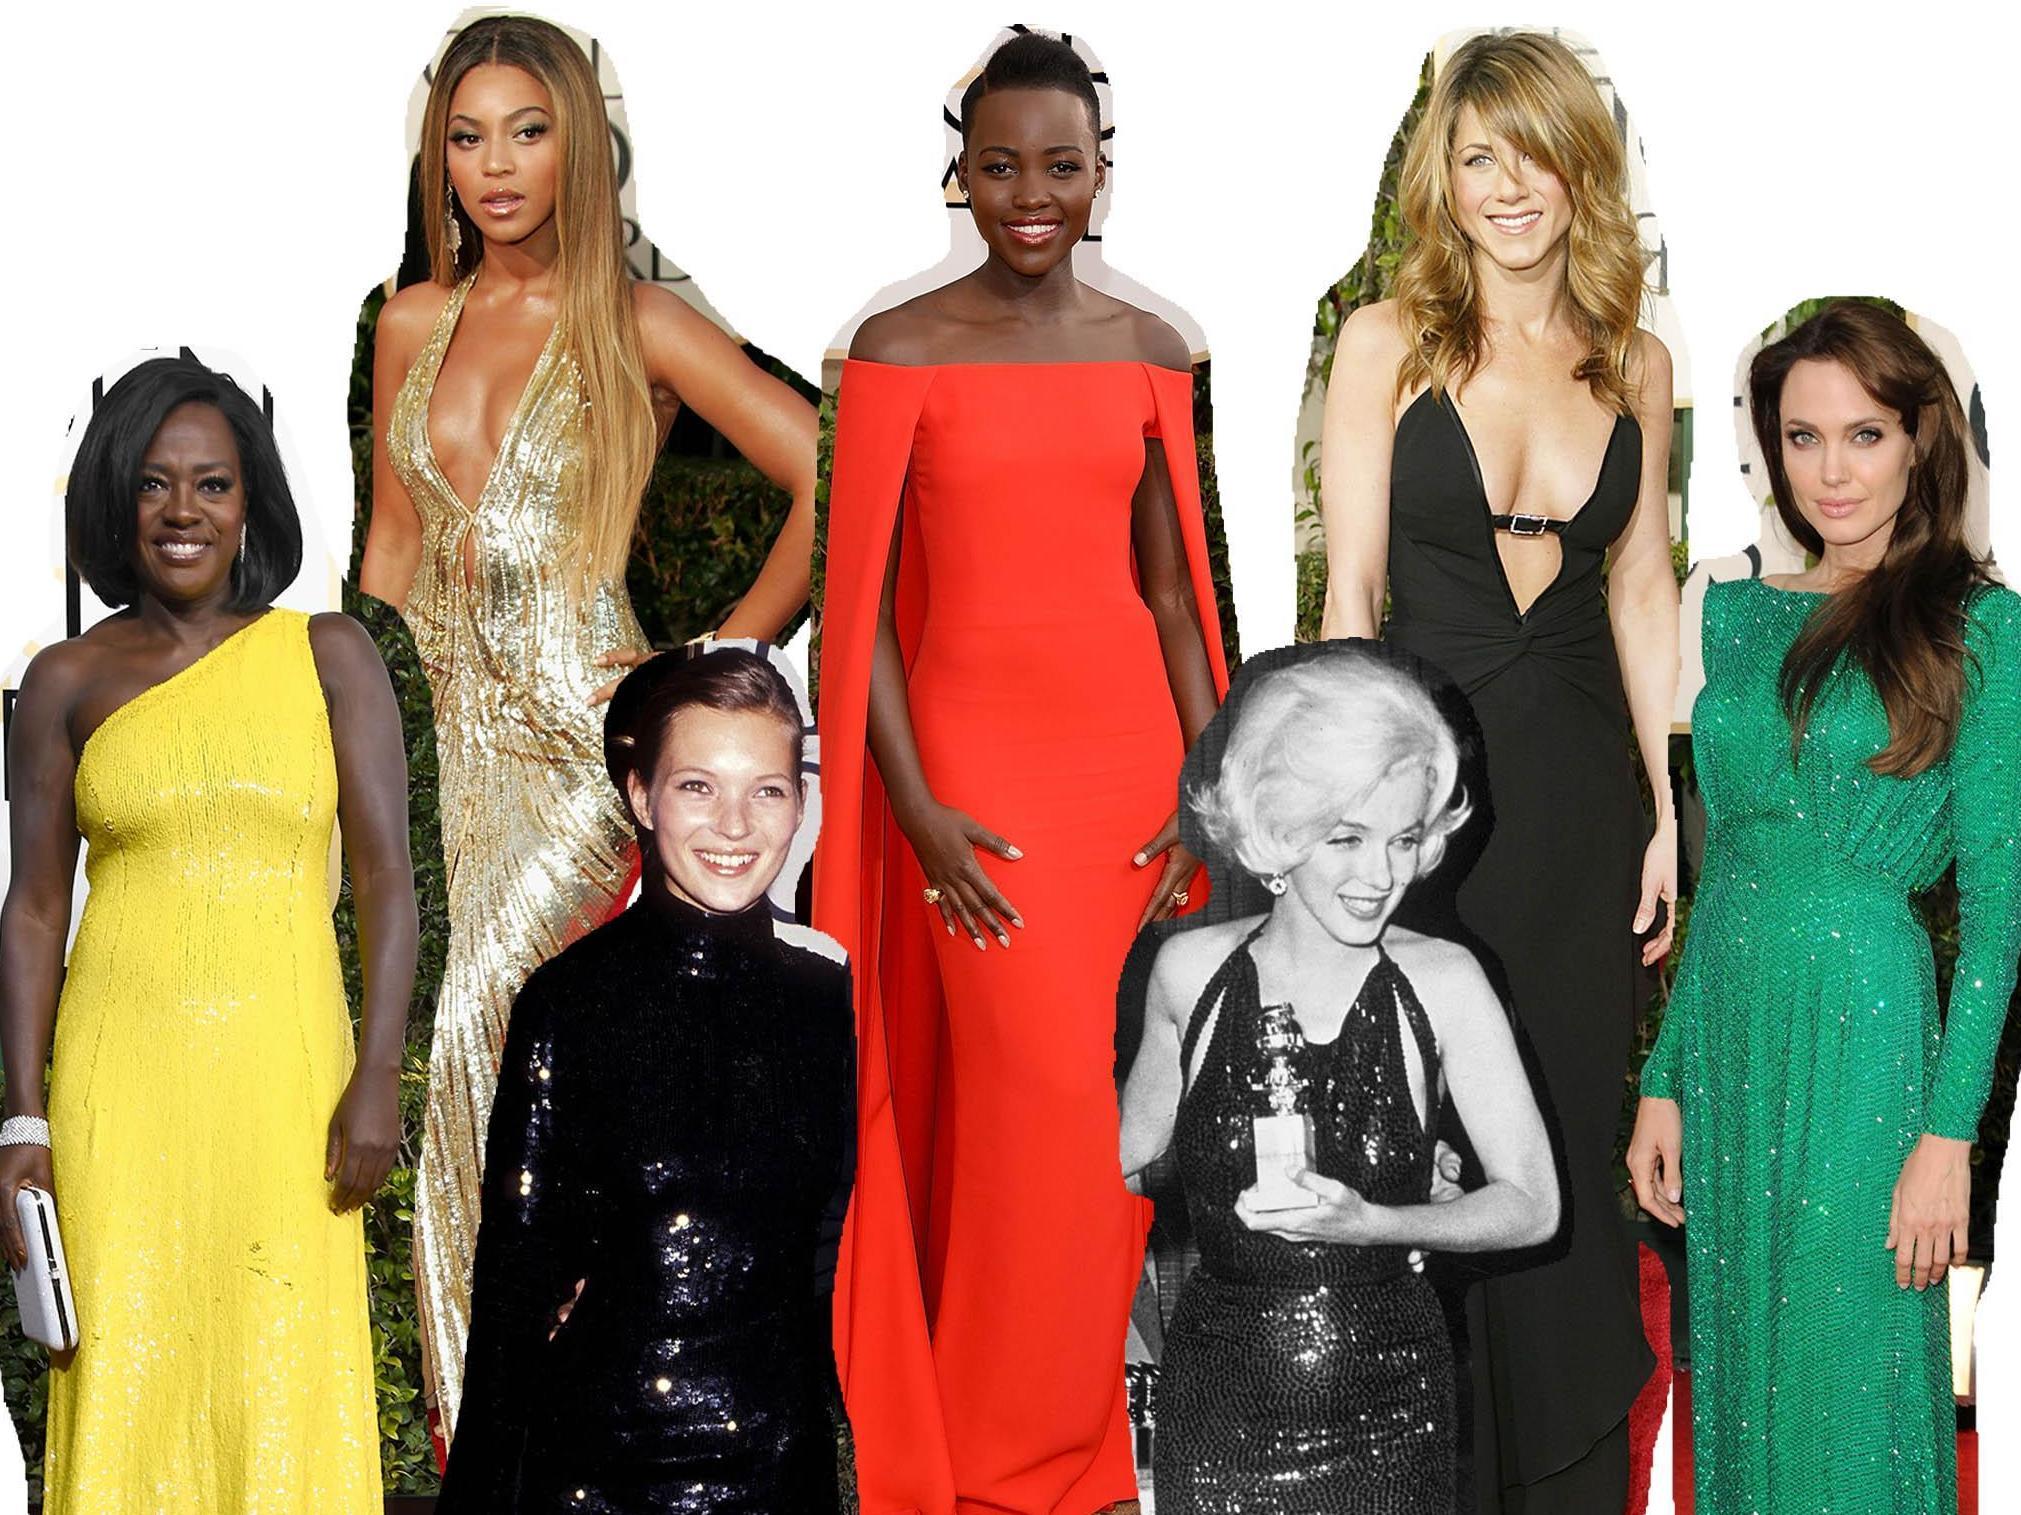 Golden Globes: Most iconic dresses of all time, from Lady Gaga to